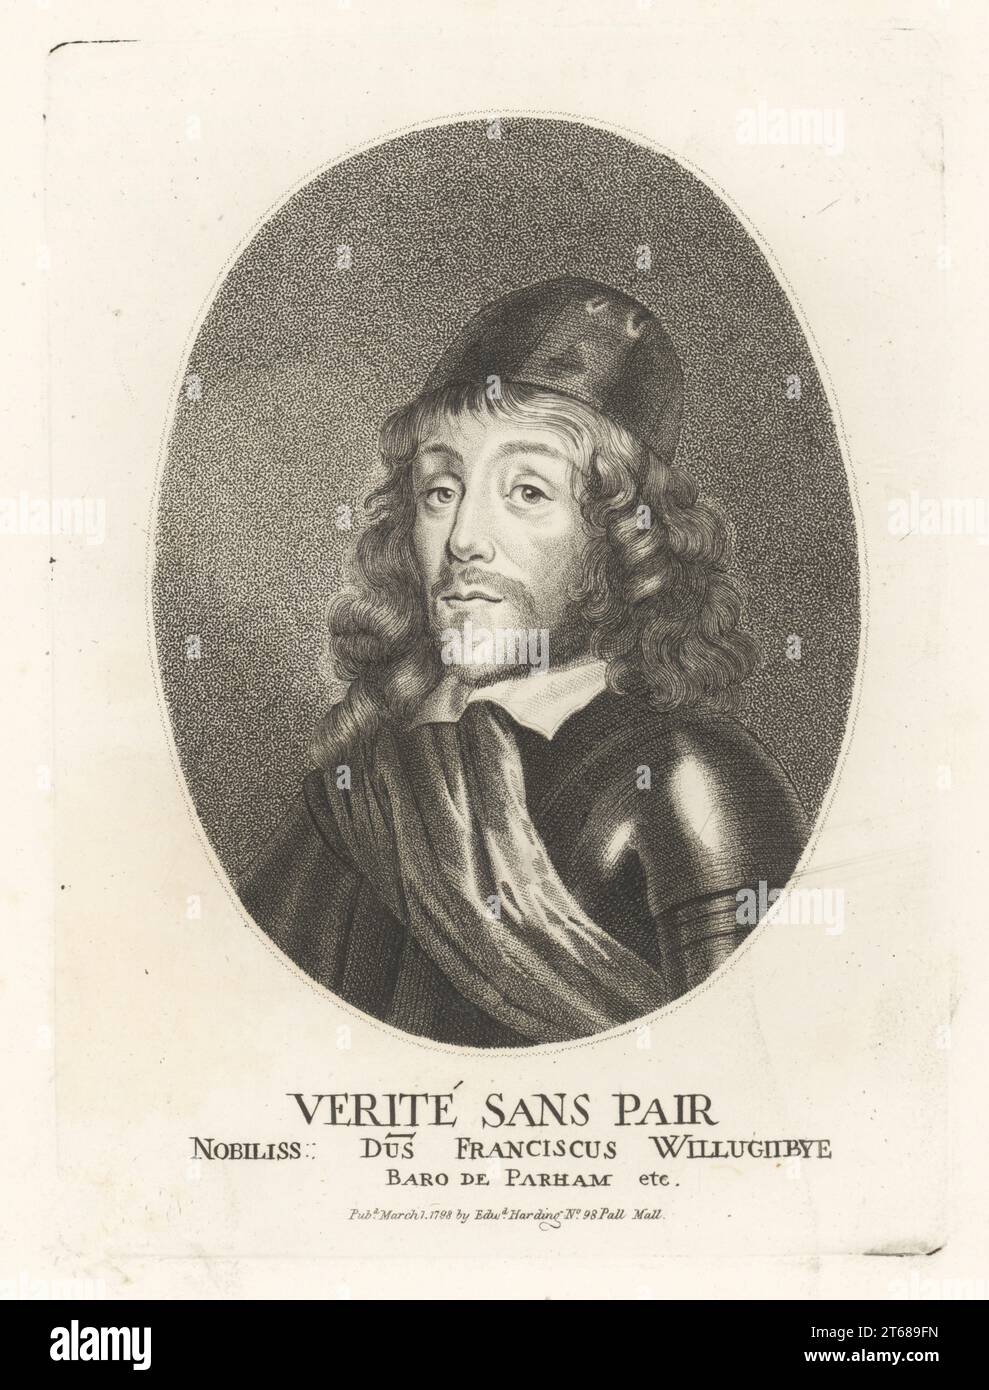 Oval portrait of Francis Willoughby, 5th Baron Willoughby of Parham, c.1613-1666. Parliamentary and Royalist soldier during the English Civil War, Governor of Barbados, died in a hurricane near Martinique. With shoulder-length curly hair, short beard and moustache, wearing skull-cap, collar, sash and armour. Verite sans Pair. Nobiliss Dus Franciscus Willoughbye, Baro de Parham. Copperplate engraving by Edward Harding from John Adolphus The British Cabinet, containing Portraits of Illustrious Personages, printed by T. Bensley for E. Harding, 98 Pall Mall, London, 1799. Stock Photo